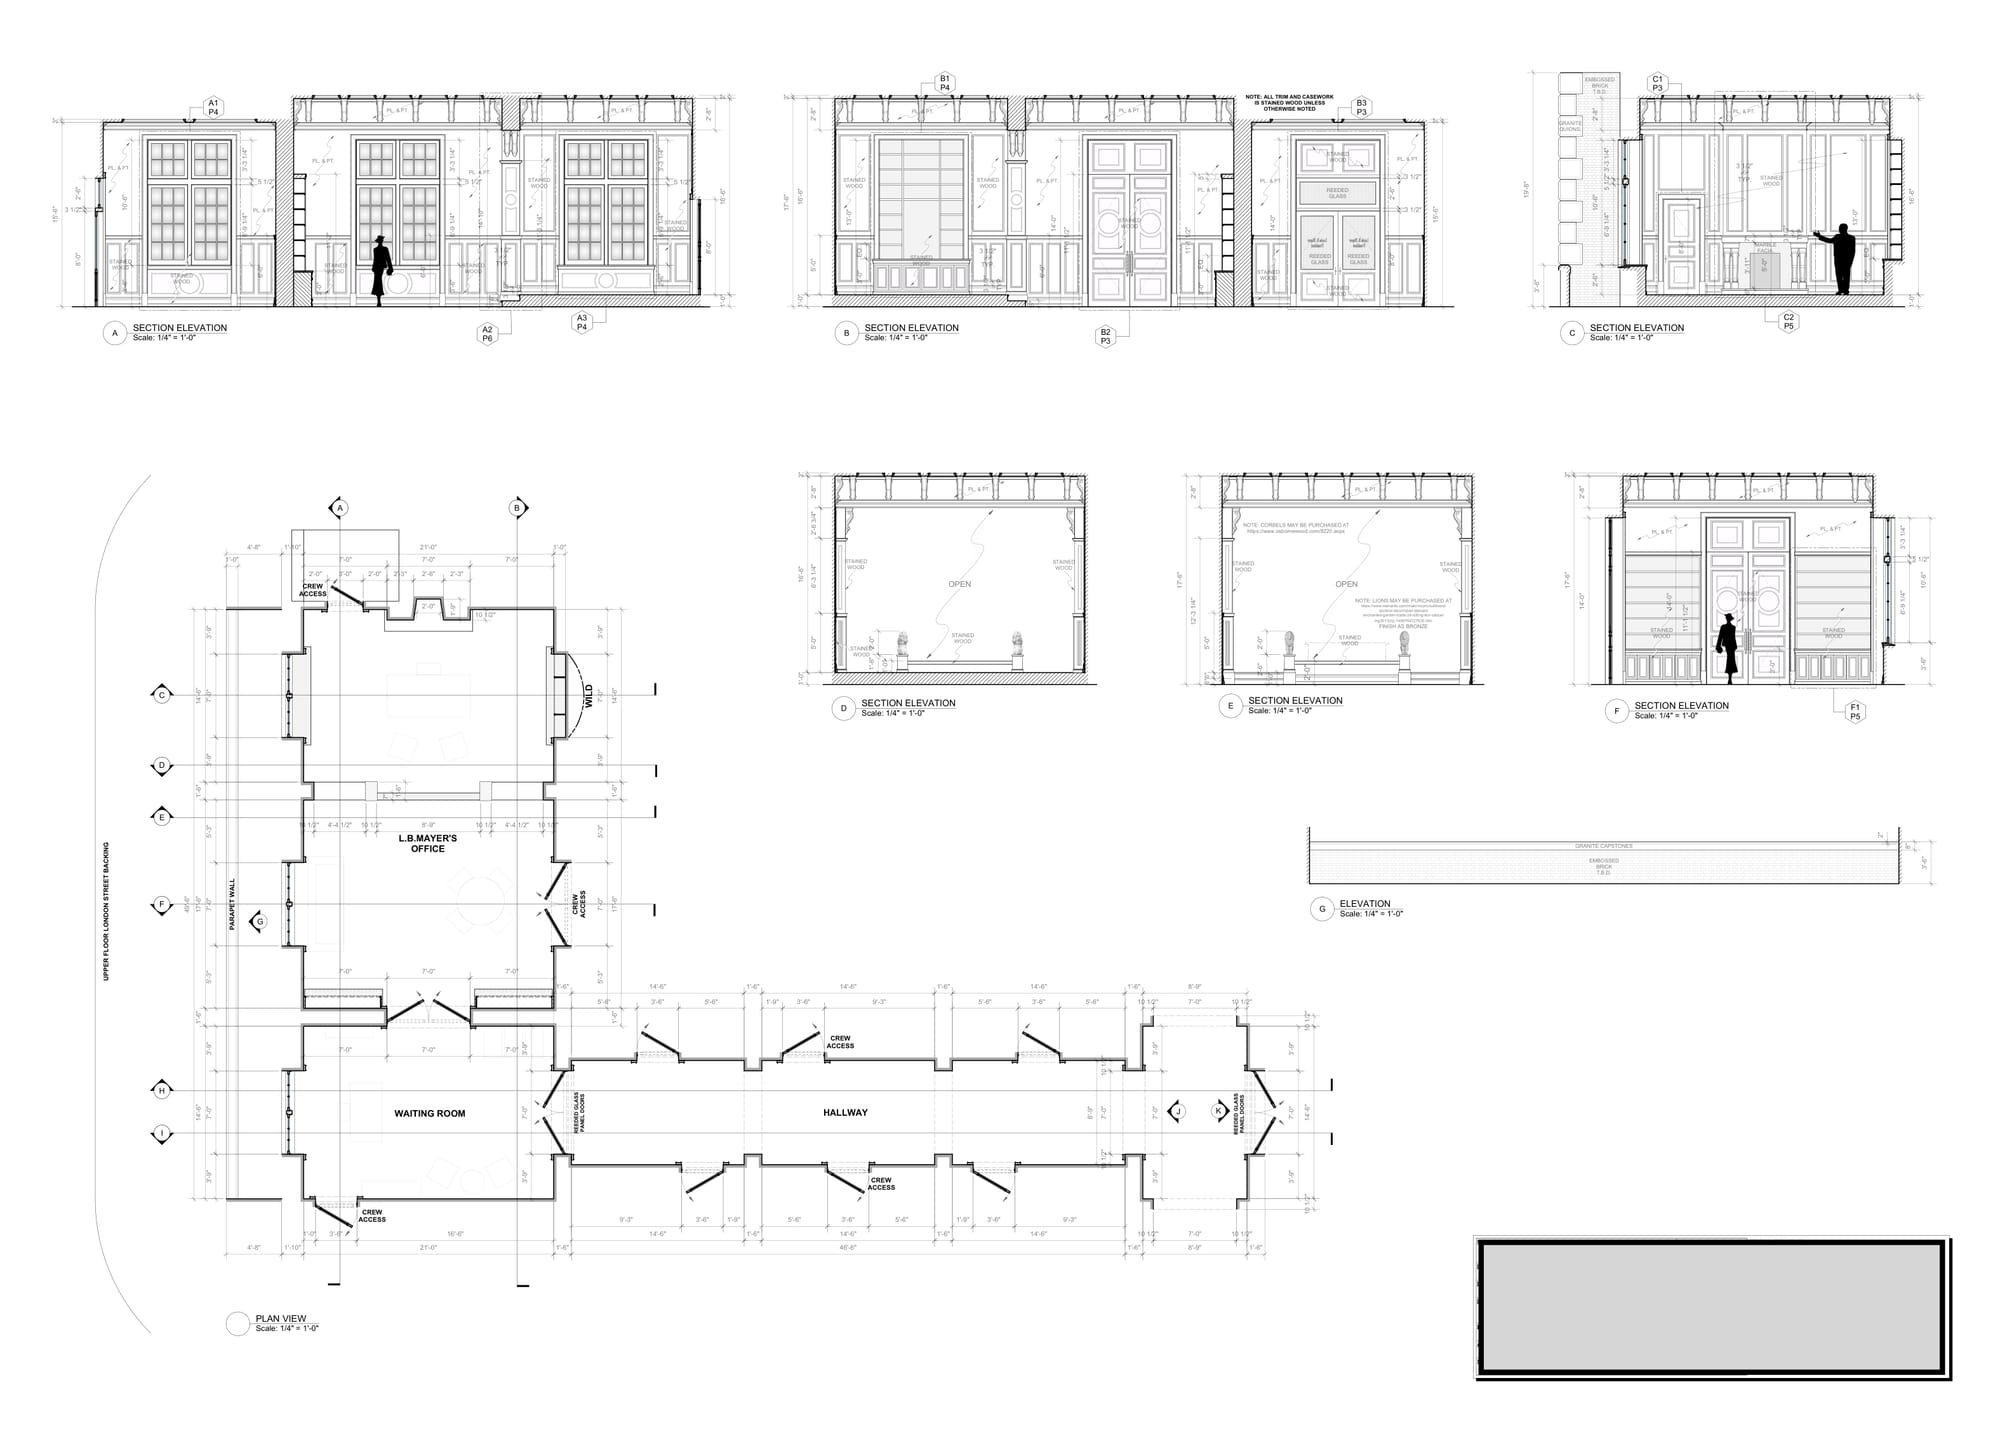 Radiant - interior LB Mayer's London office, plan and elevation plate